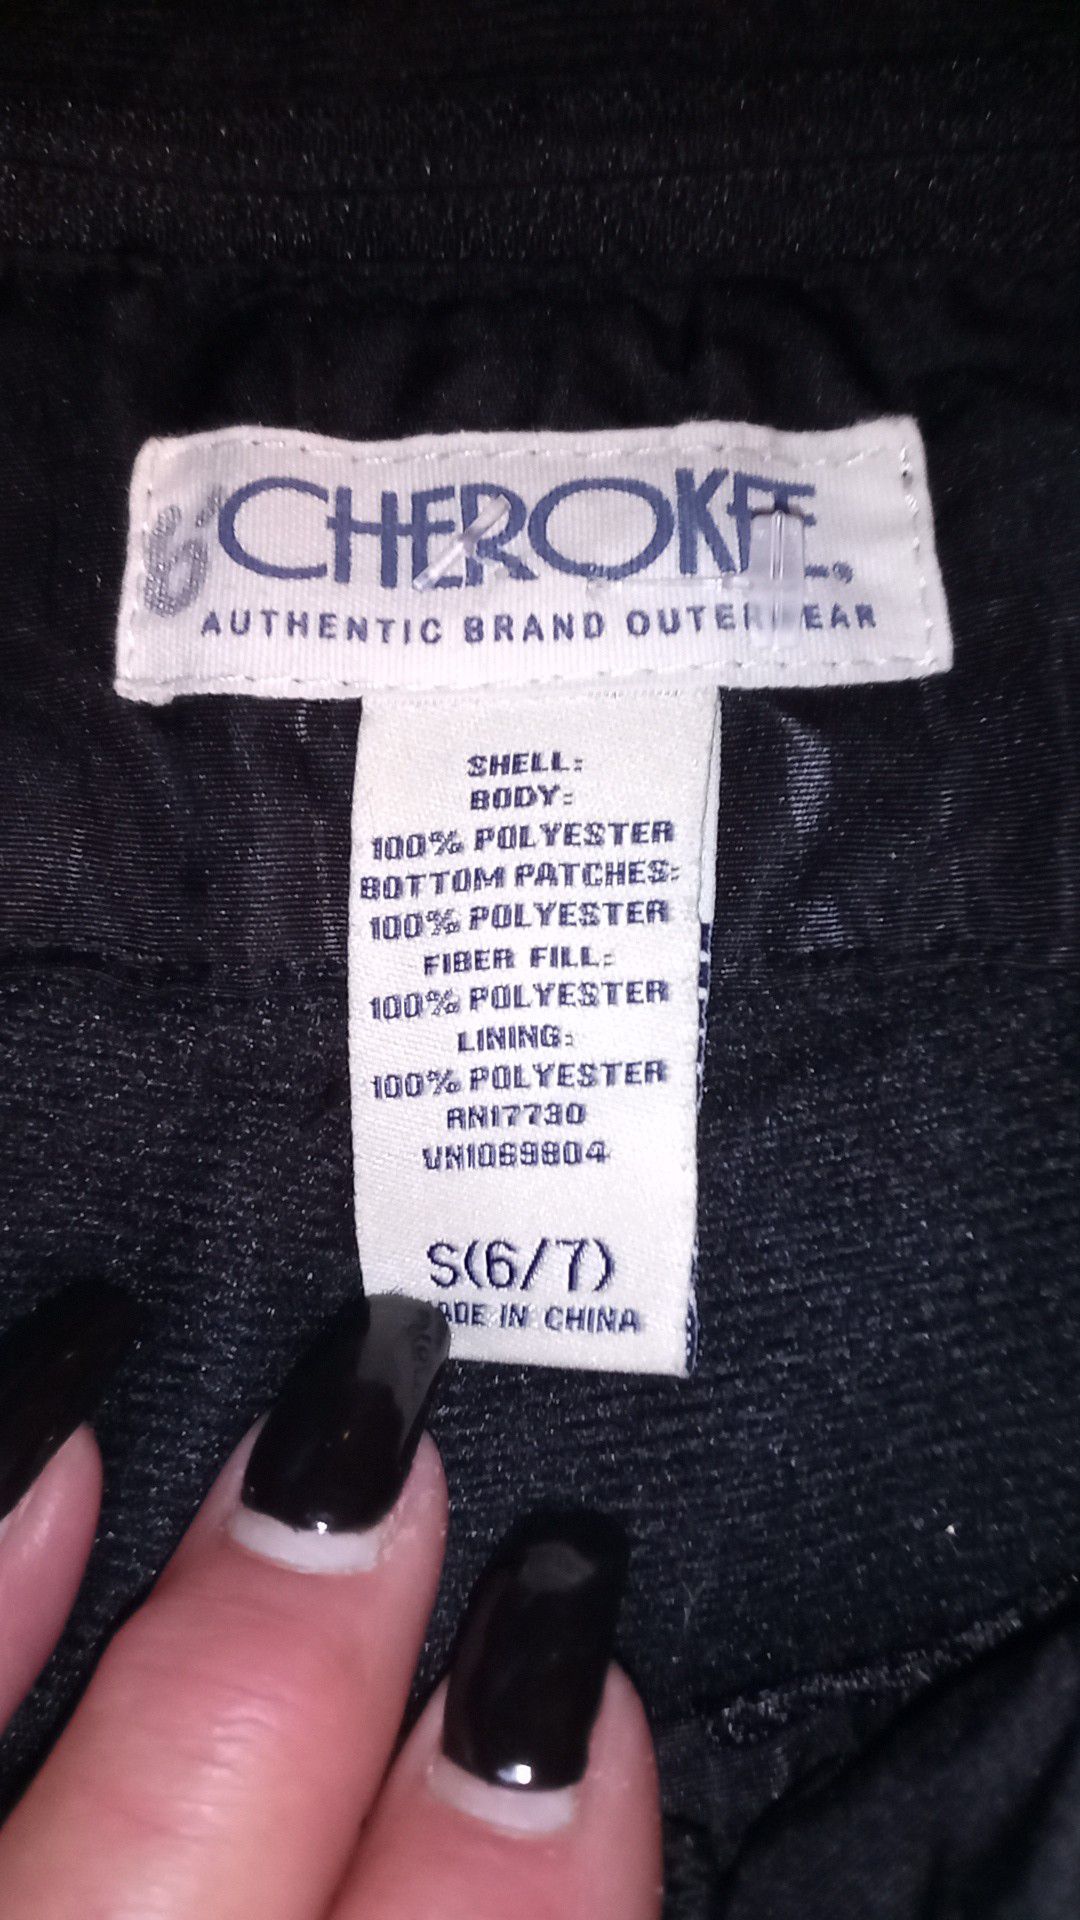 Kids Cherokee bib overalls size 6/7 with detachable bibs to interchange into pants in brand new condition